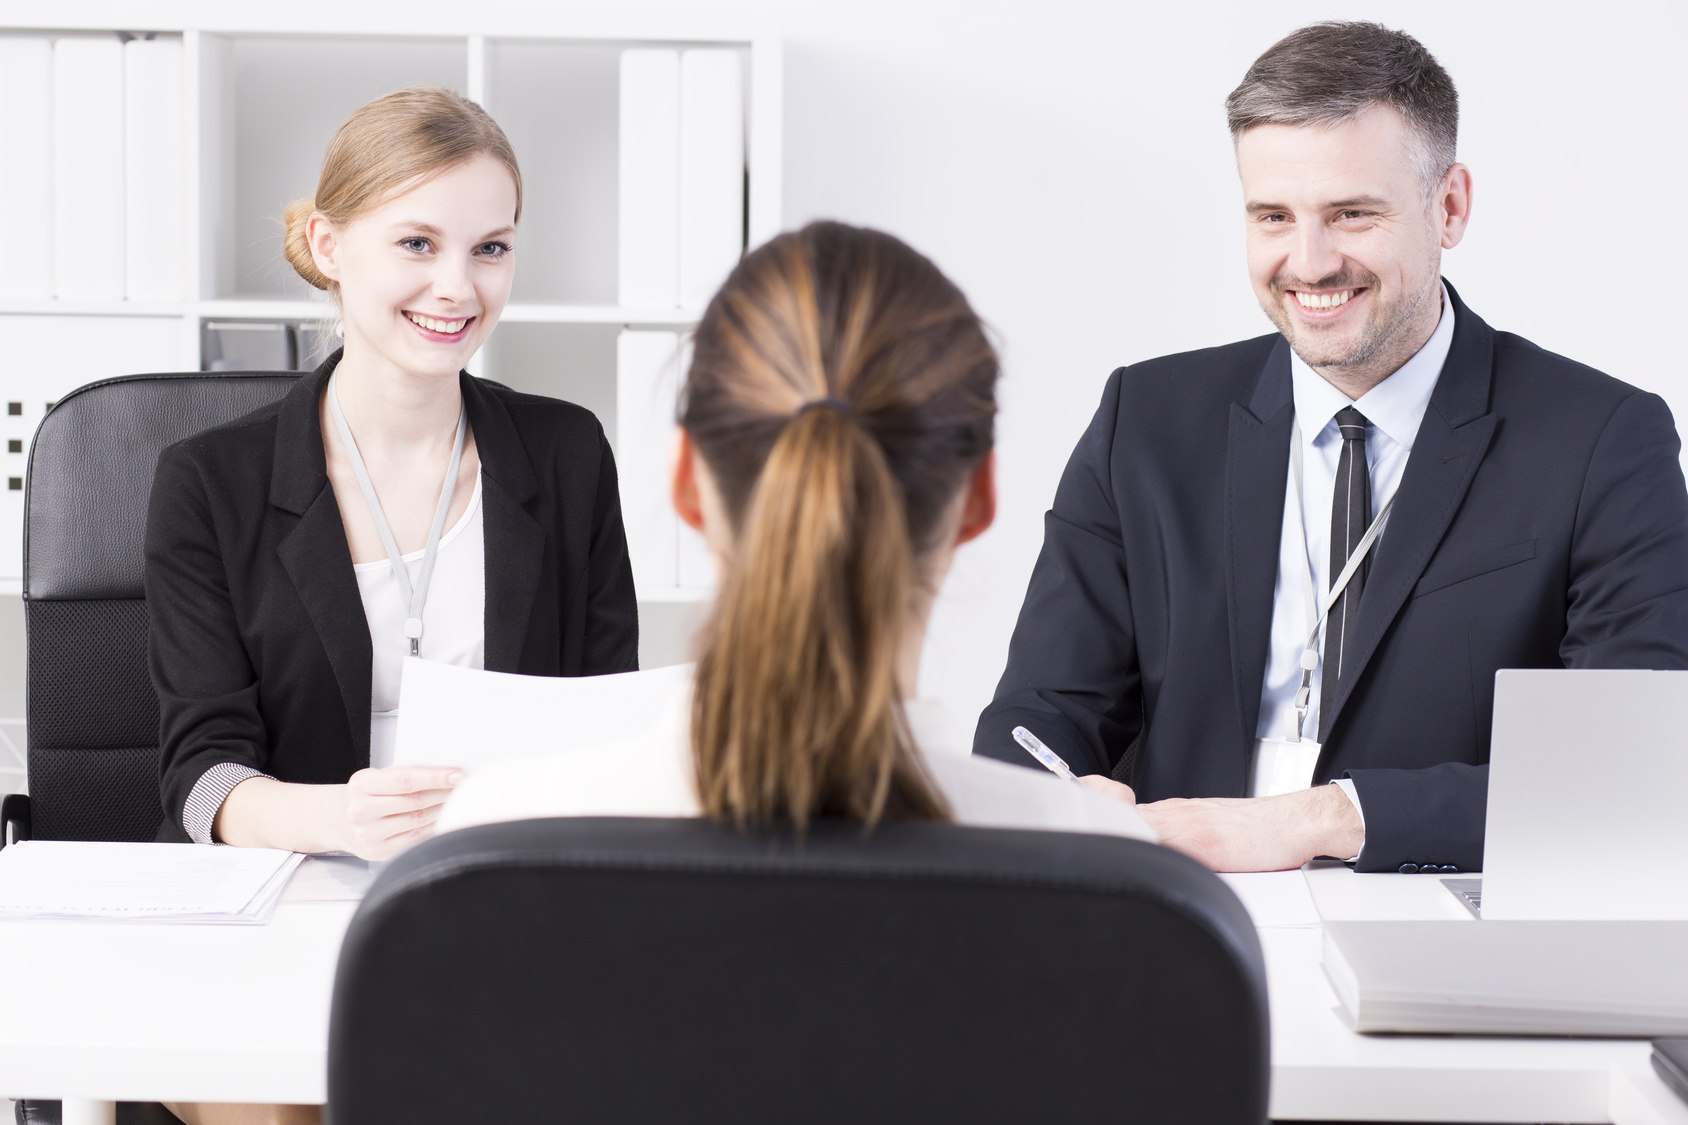 Creating a friendly atmosphere during a job interview